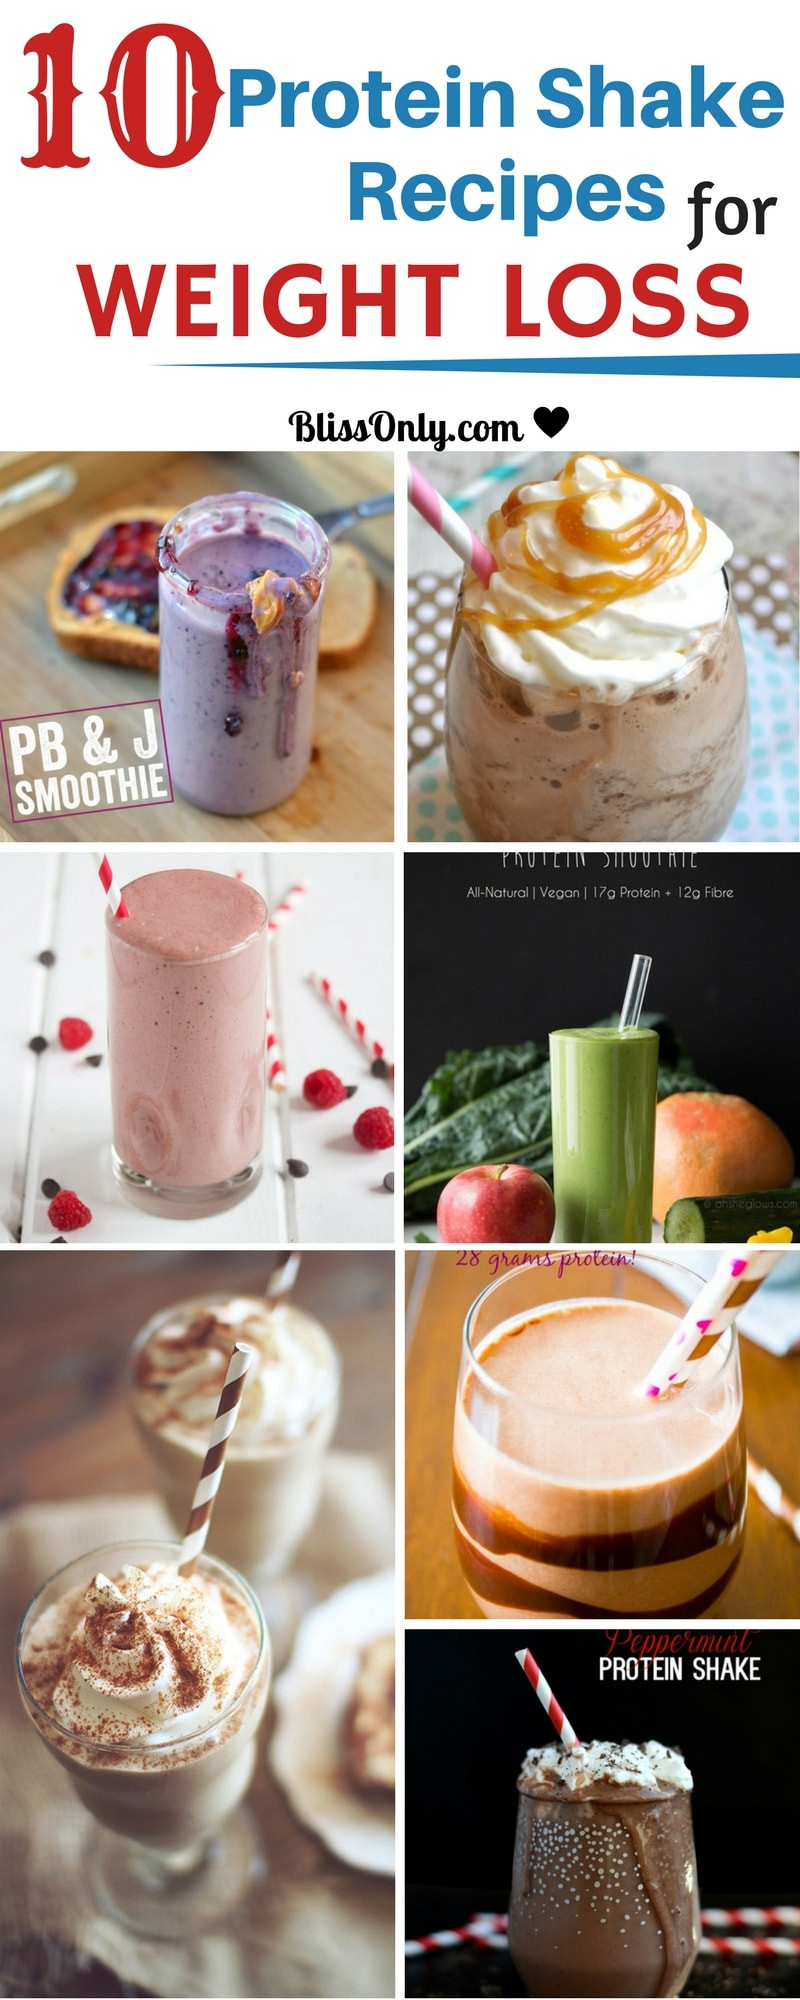 Best Protein Shake Recipes For Weight Loss
 10 Protein Shake Recipes For Weight Loss Bliss ly